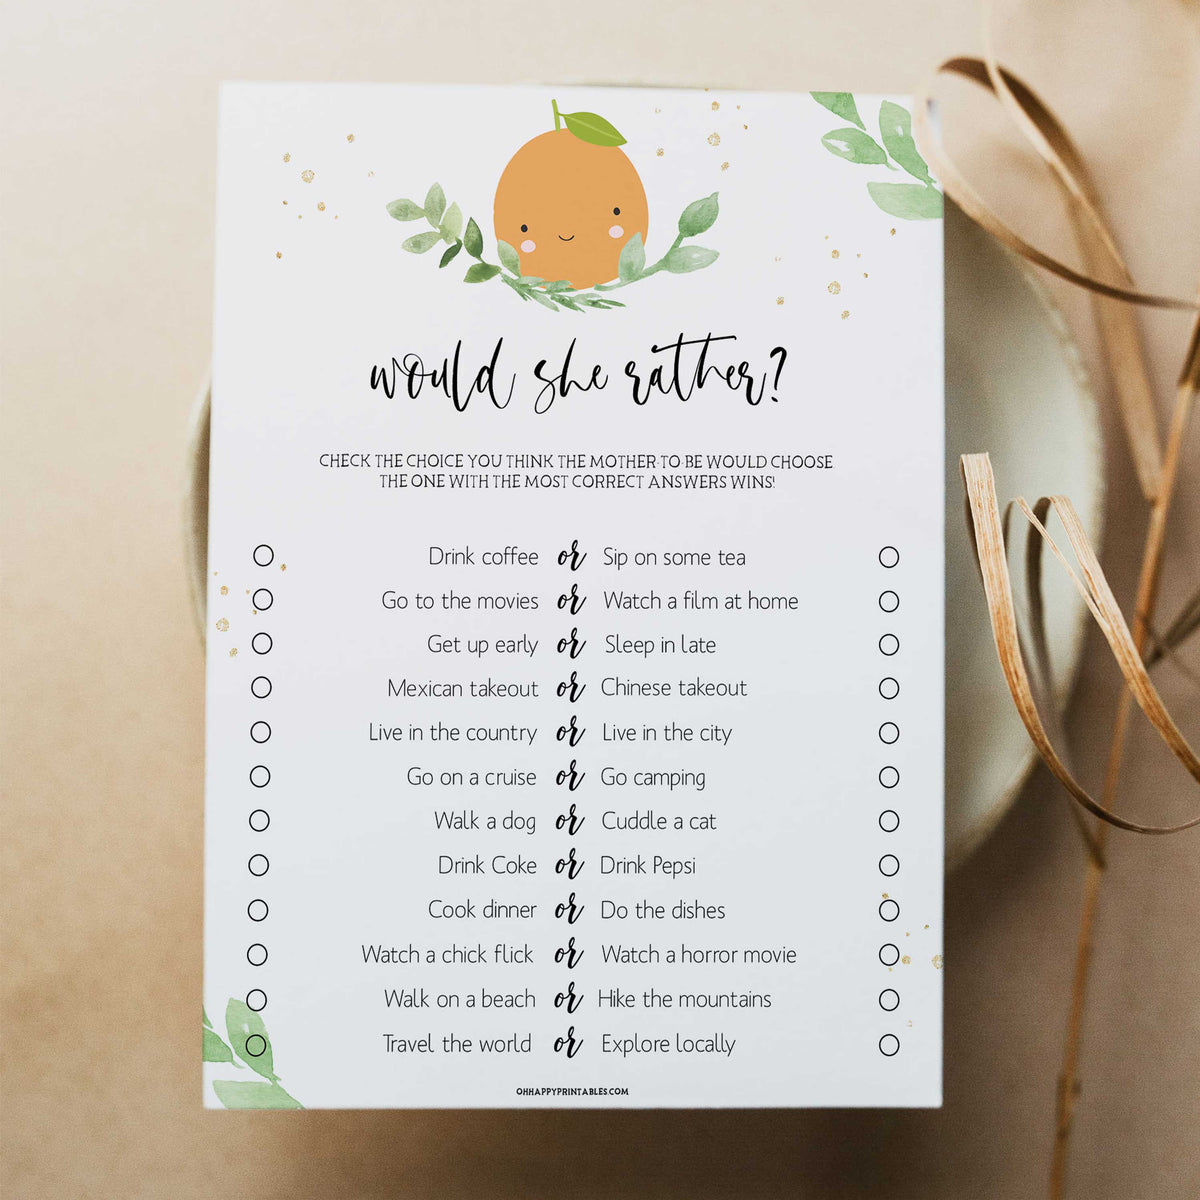 would she rather baby game, Printable baby shower games, little cutie baby games, baby shower games, fun baby shower ideas, top baby shower ideas, little cutie baby shower, baby shower games, fun little cutie baby shower ideas